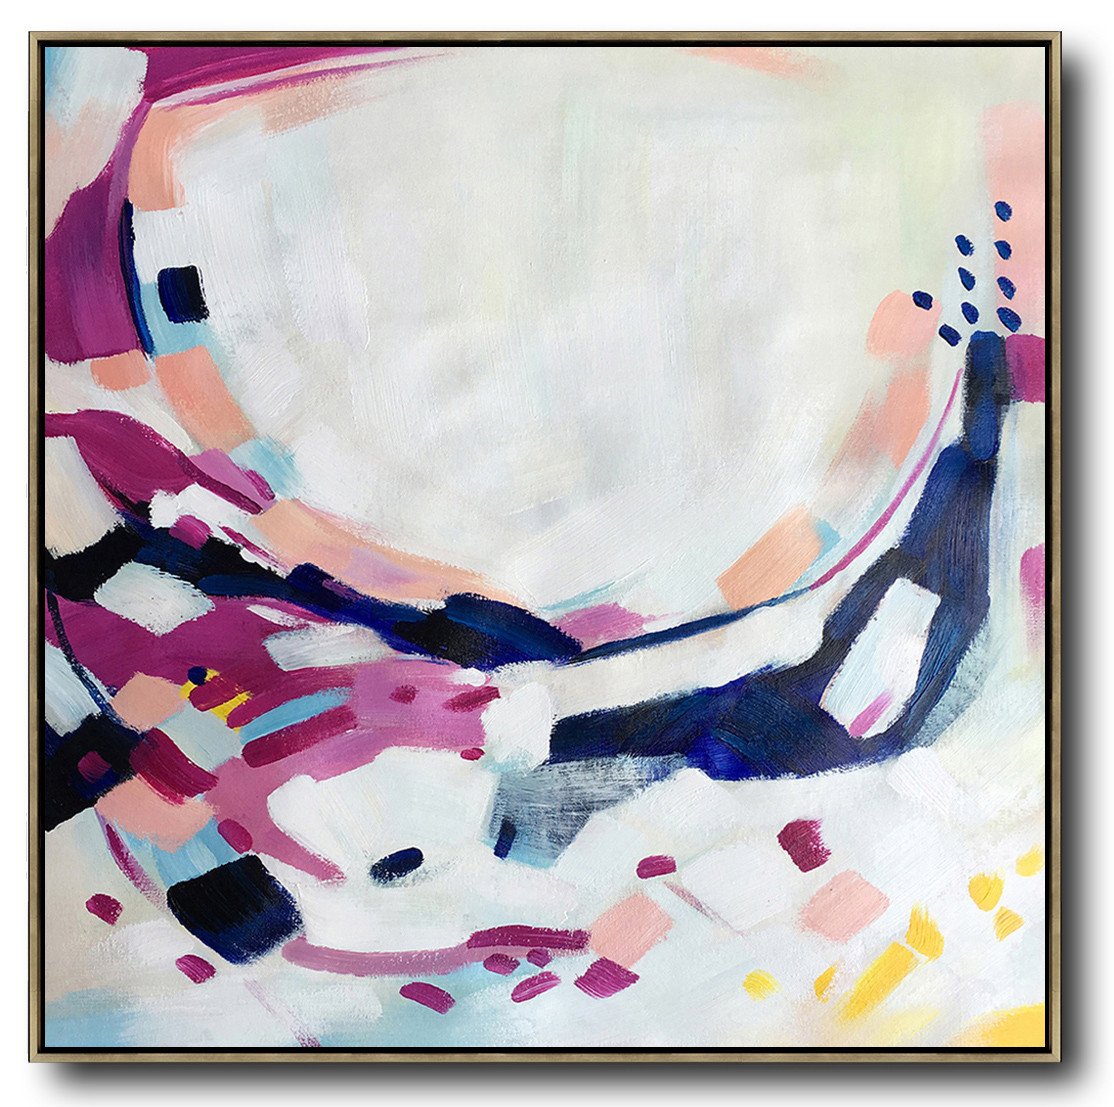 Large Modern Abstract Painting,Oversized Contemporary Art,Canvas Wall Art,White,Purple,Pink,Dark Blue.etc